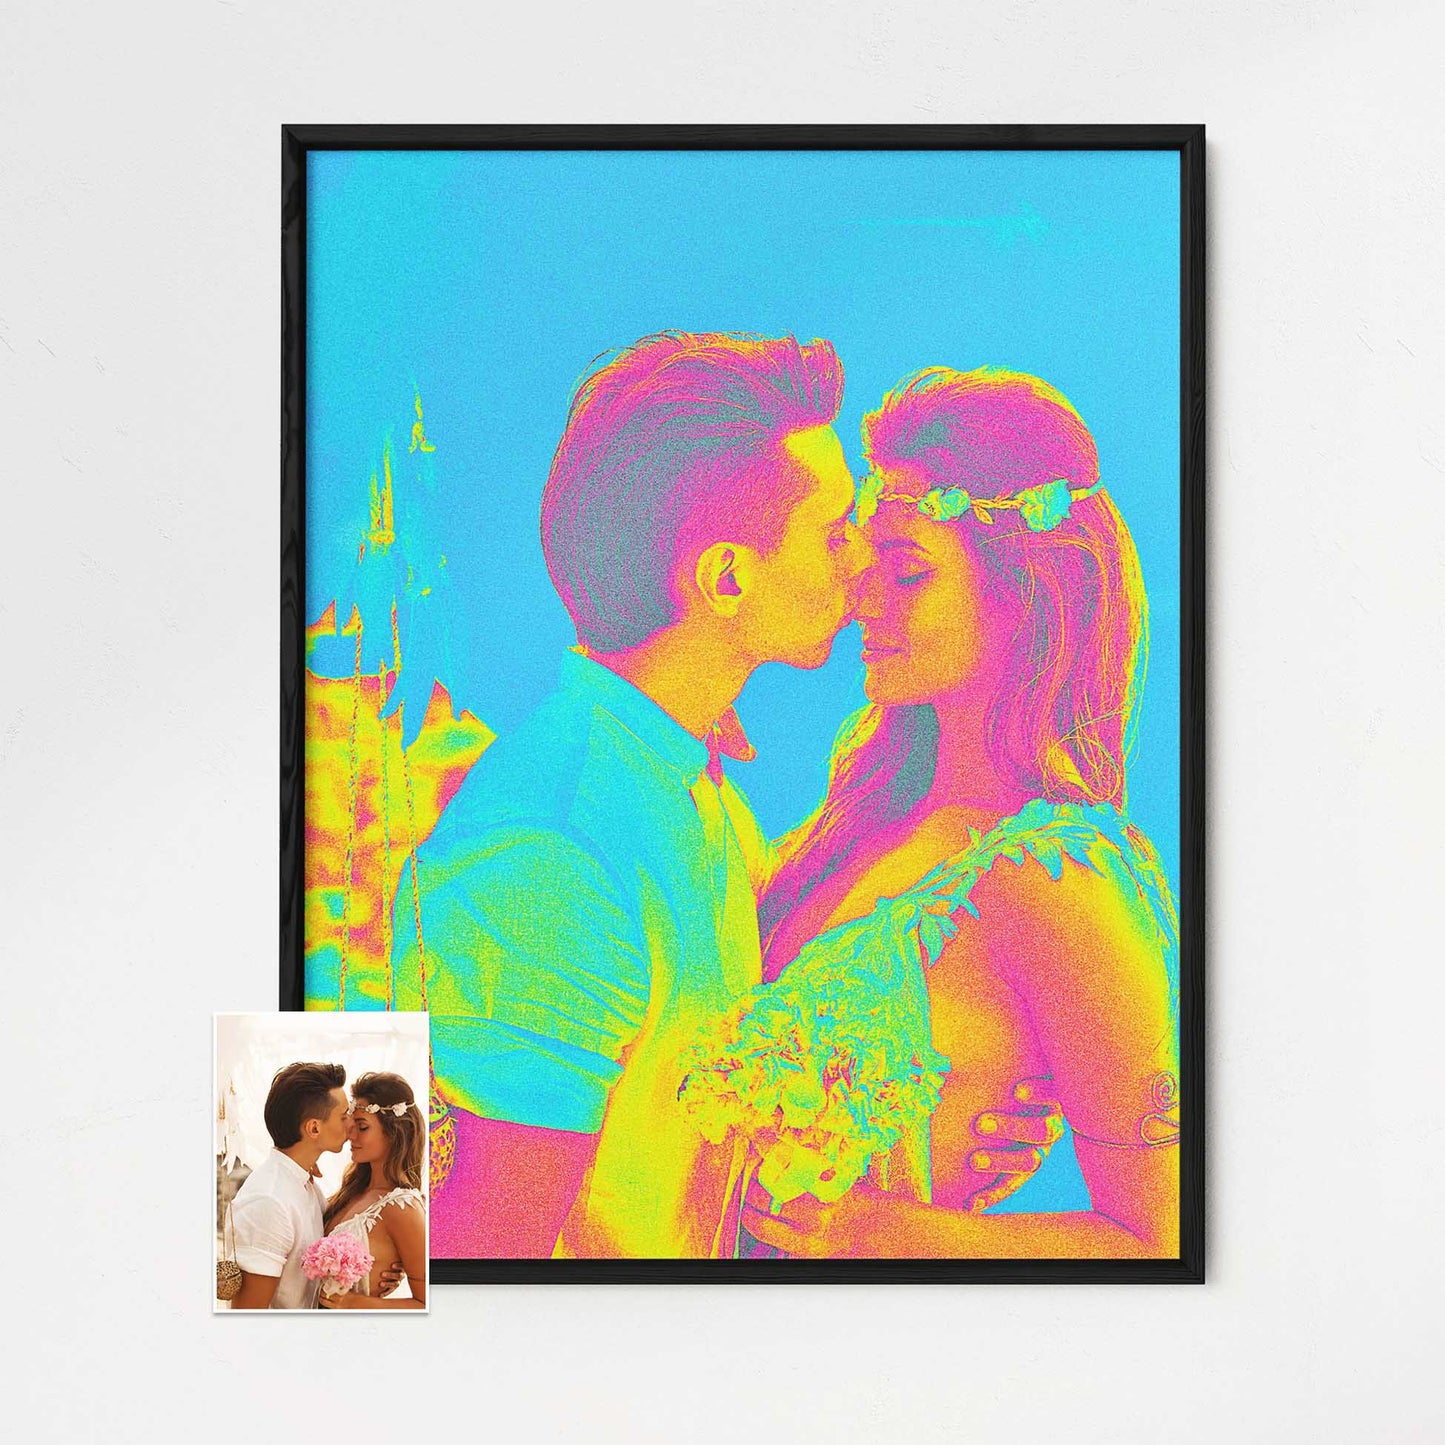 Infuse your home with creativity and vibrancy through Personalised Acid Trip Framed Print. This fine digital art piece boasts a colorful and vivid design that leaves a lasting impression. Printed from your photo